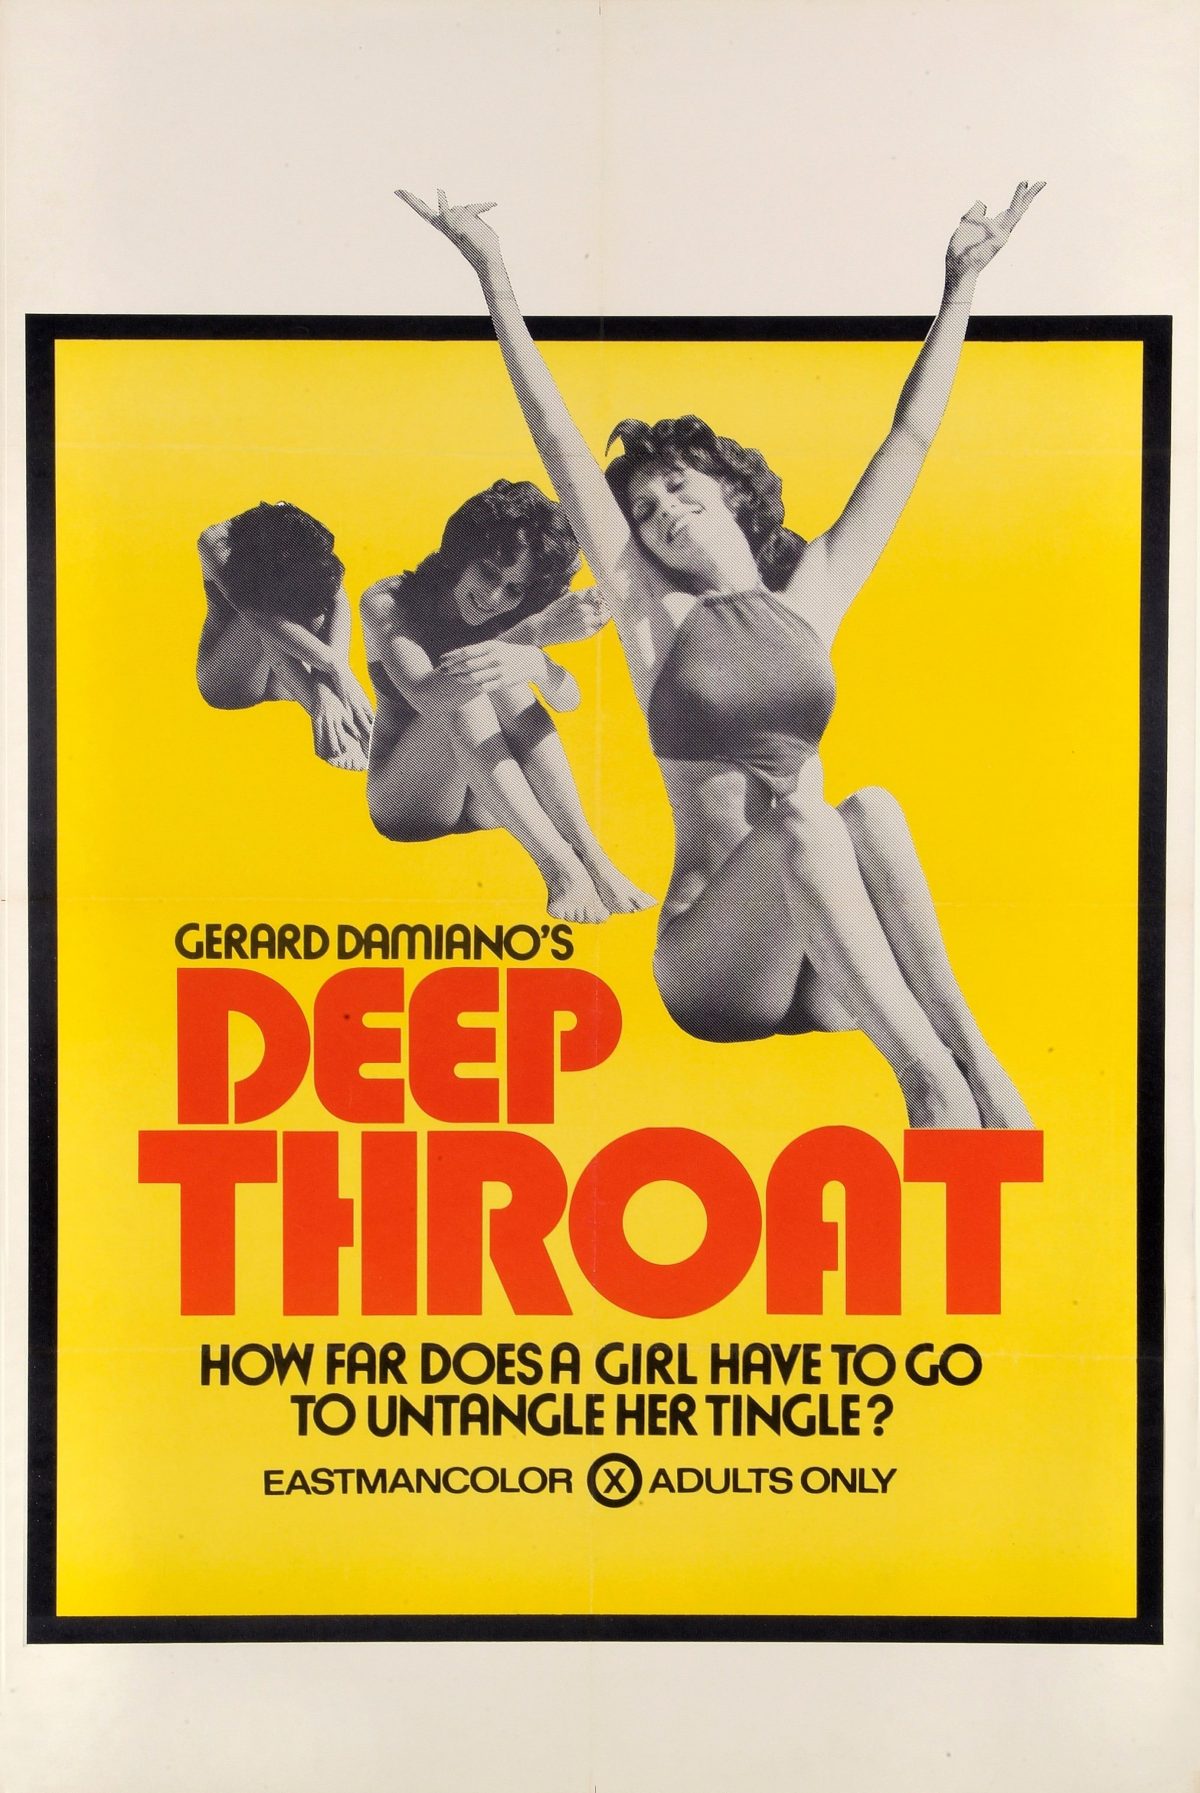 X Rated Movie Posters Of The 1960s And 1970s Flashbak